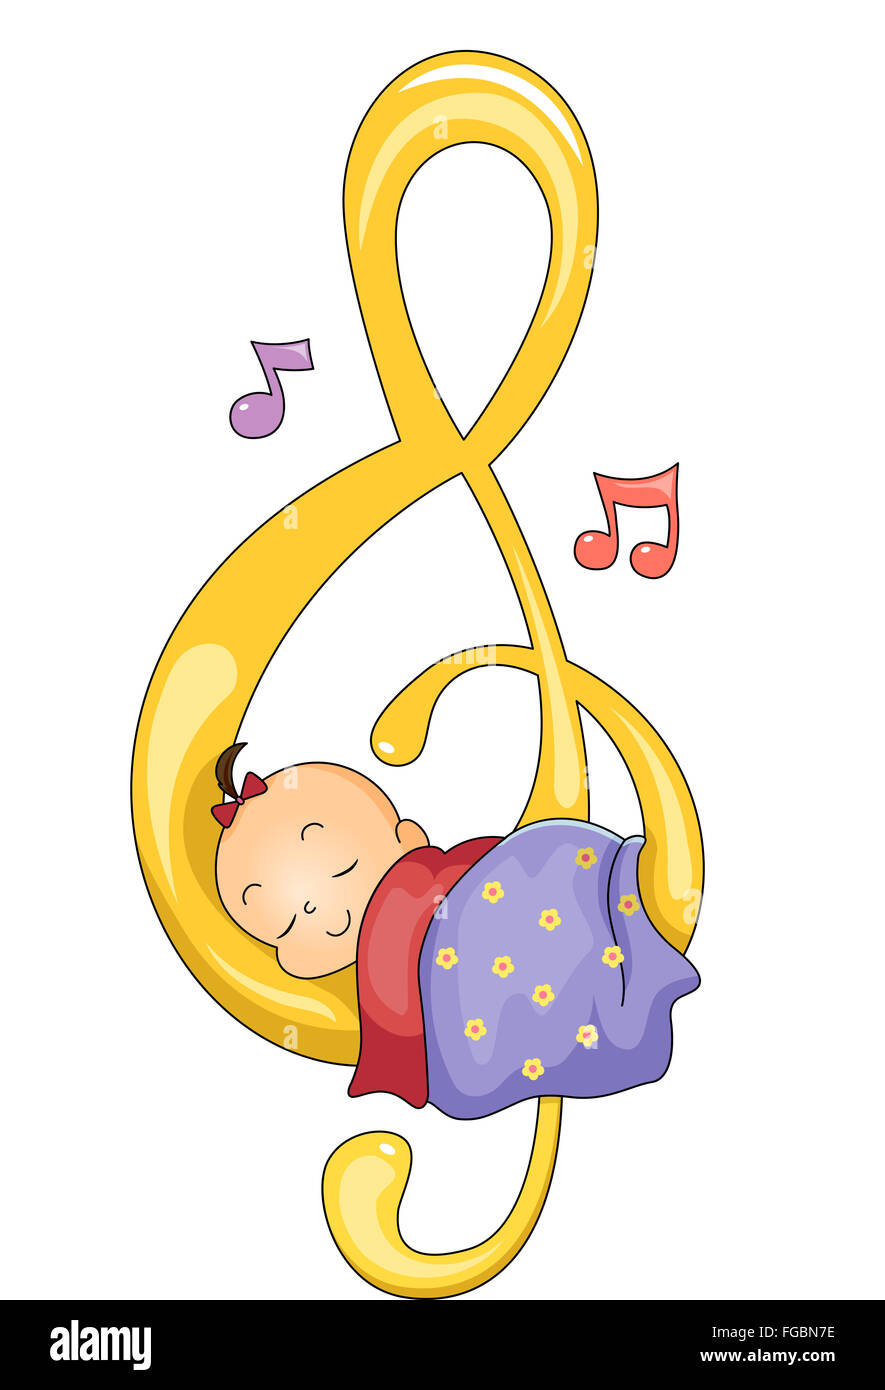 Illustration of a Baby Girl Sleeping Peacefully on a G-clef Stock Photo